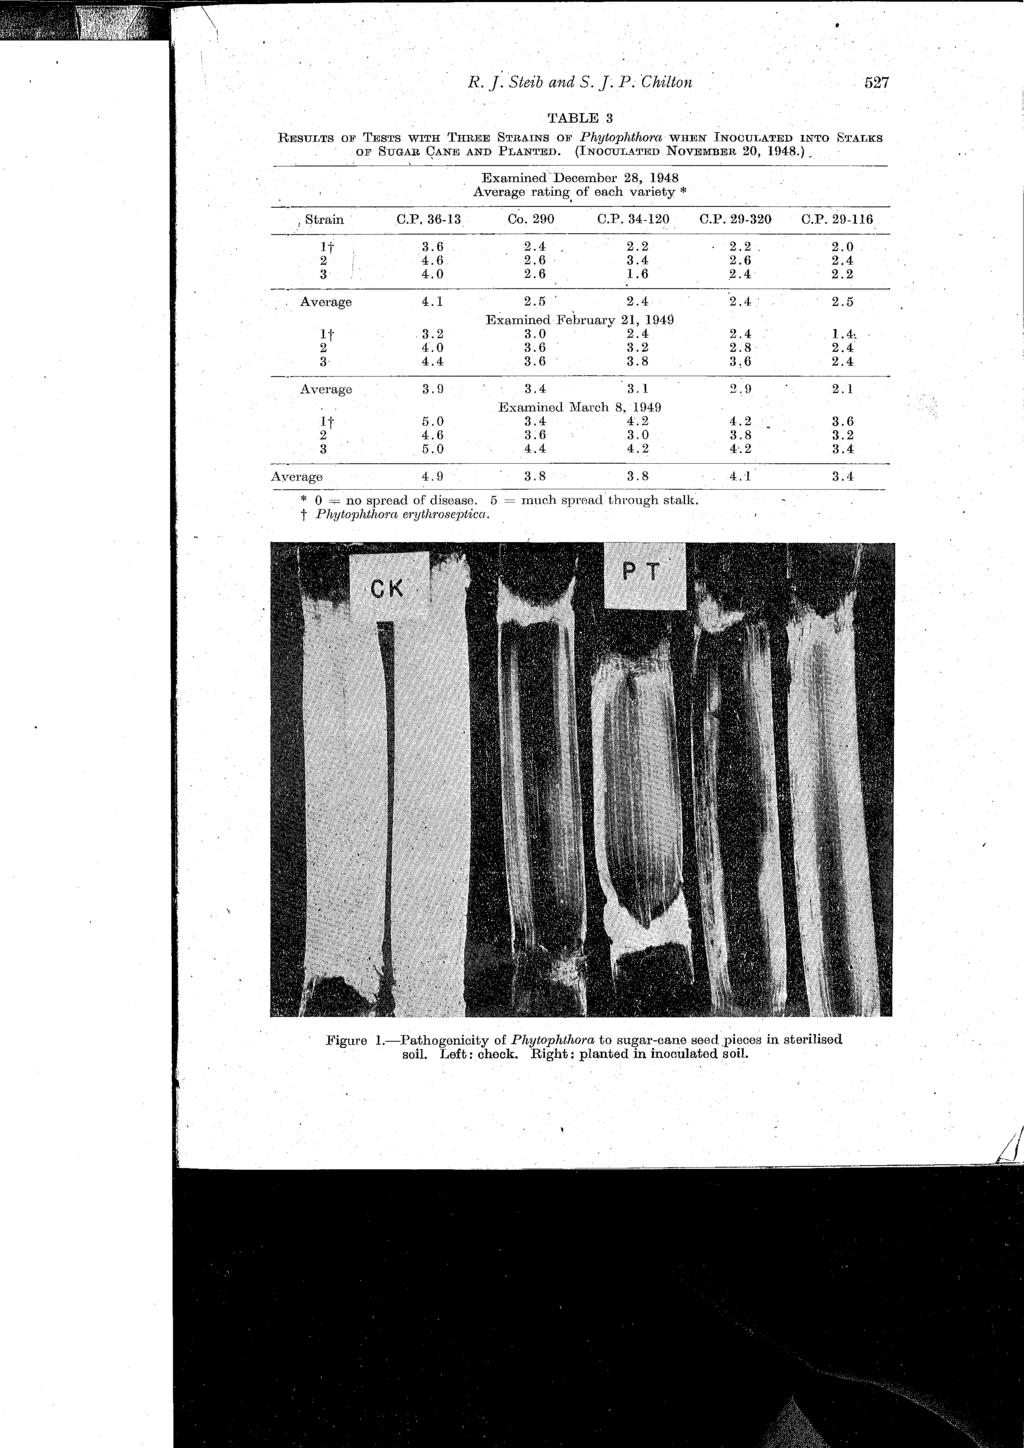 R. f Steib and S. P. Chilton 527 TABLE 3 RESULTS OF TESTS WTH THREE STRANS OF Phsftophthora. WHEN NOCULATED NTO STALKS OF SUGAR qane AND PLANTED. (NOCULATED NOVEMBER 20, 1948.